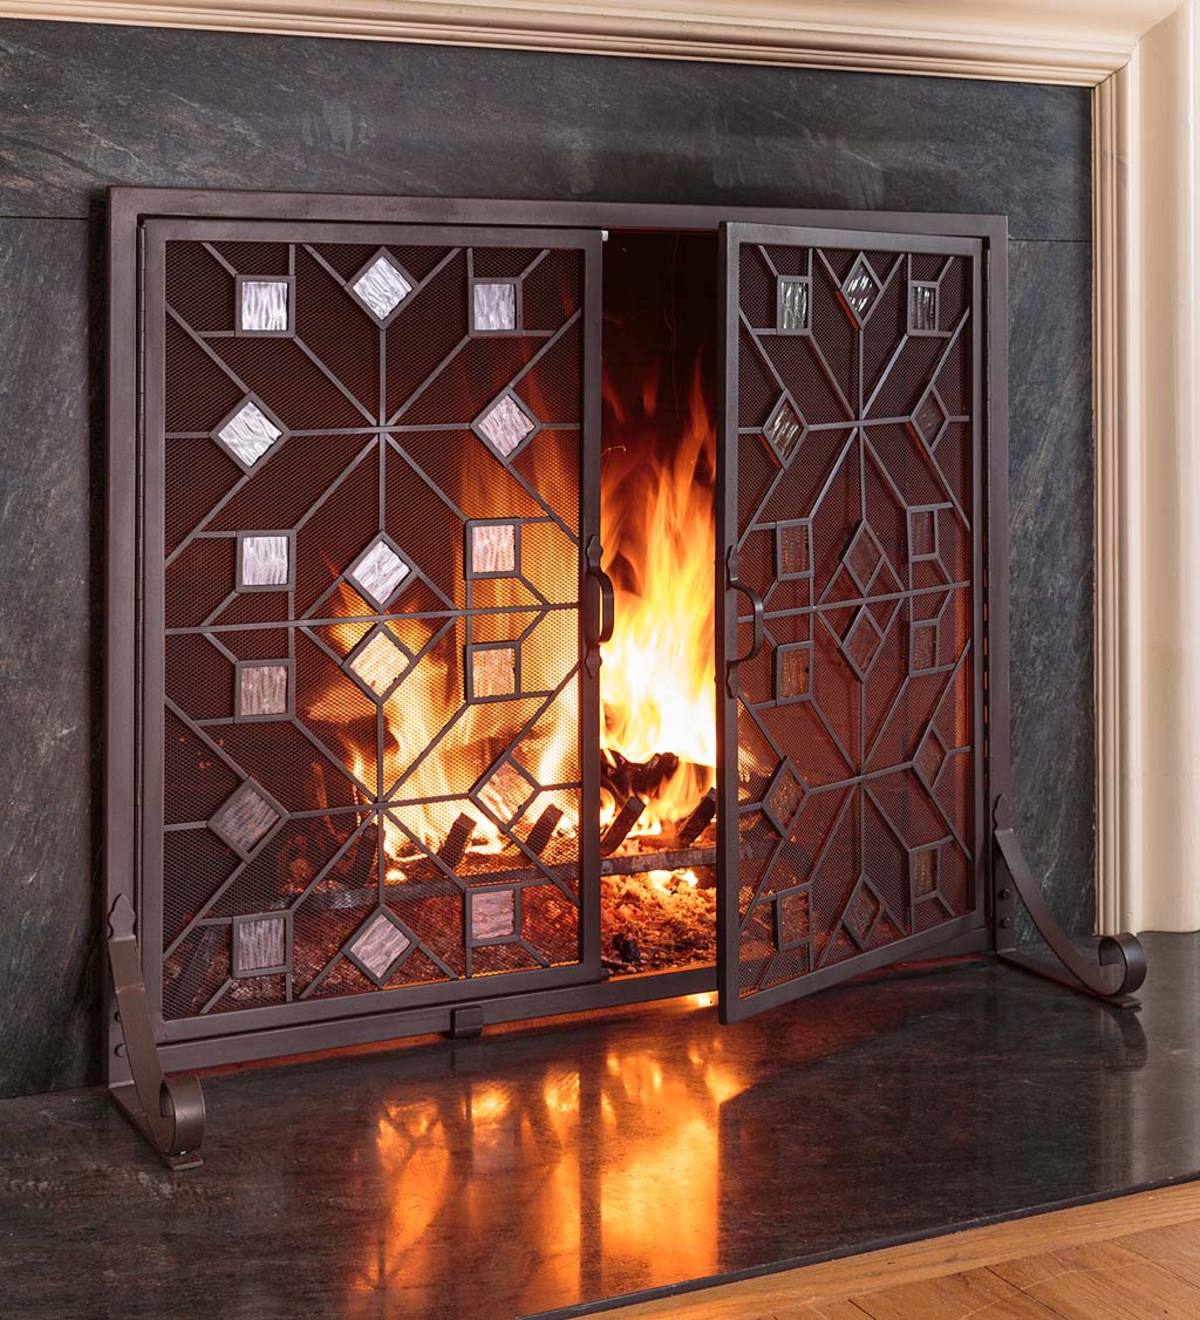 Small American Star Fireplace Screen with Glass Accents and Doors